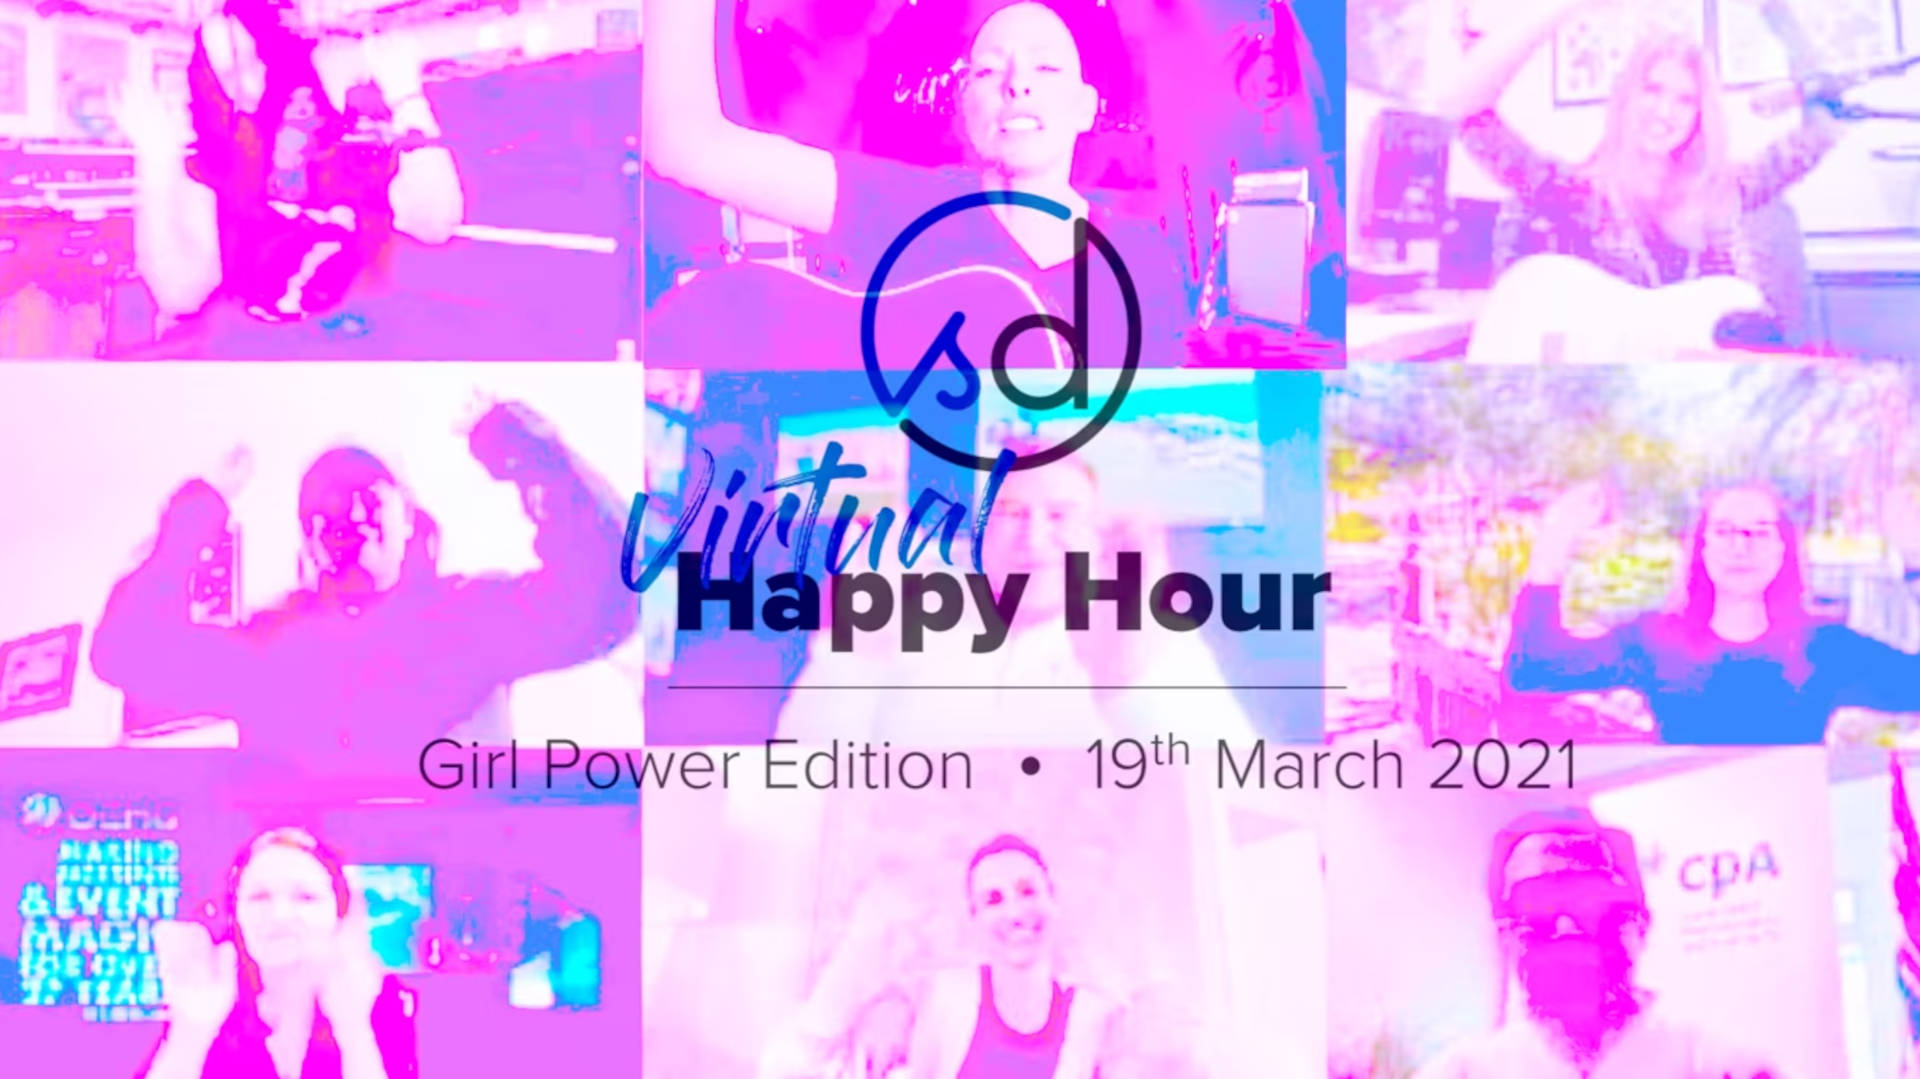 Girl Power Edition: Free Virtual Happy Hour with SongDivision